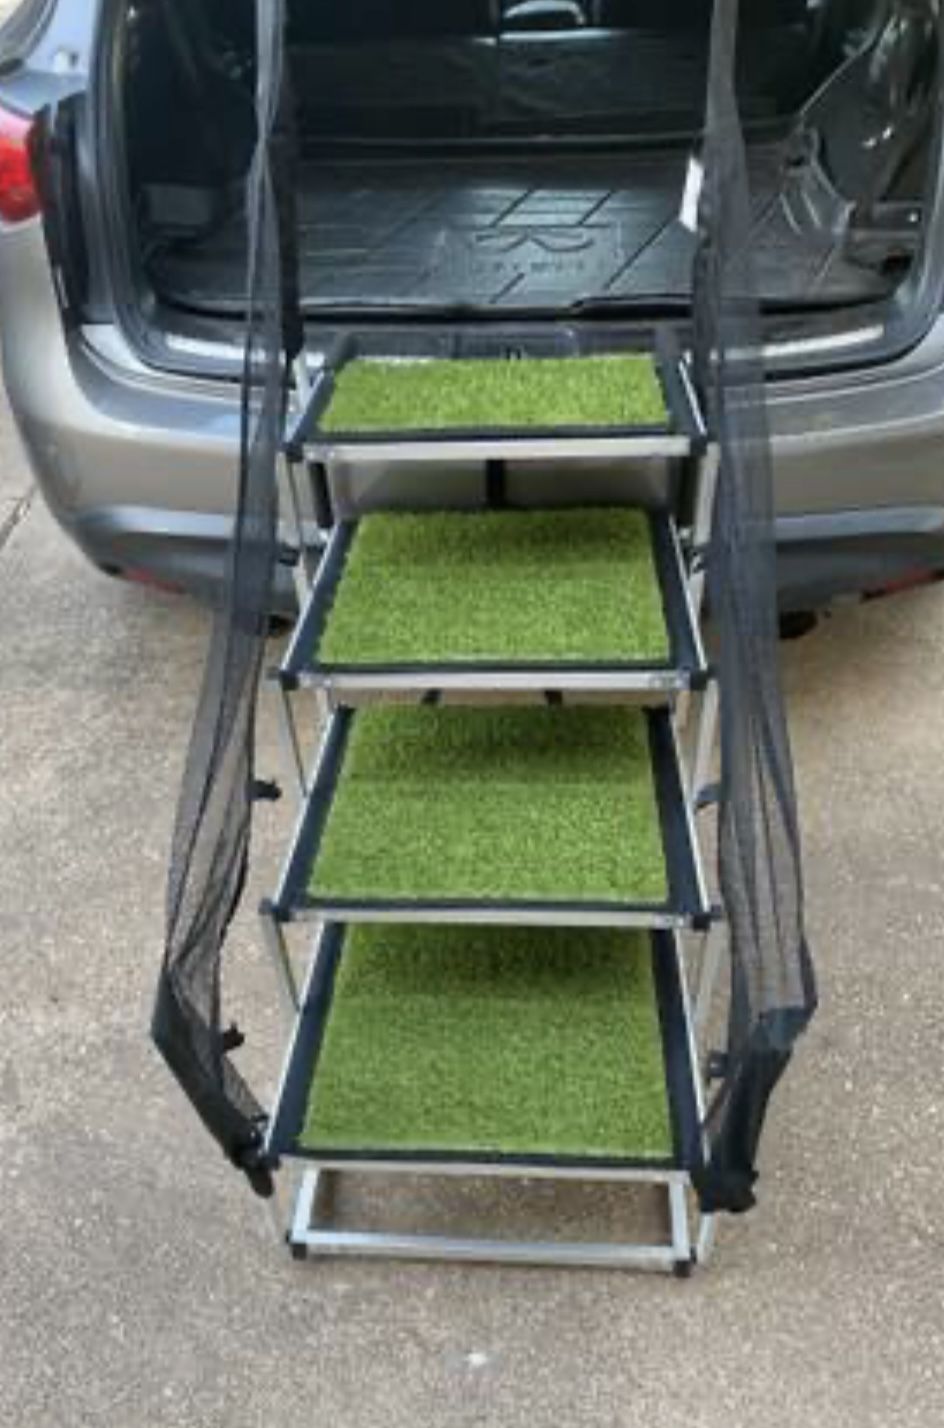 New! Dog Car Stairs w/grass